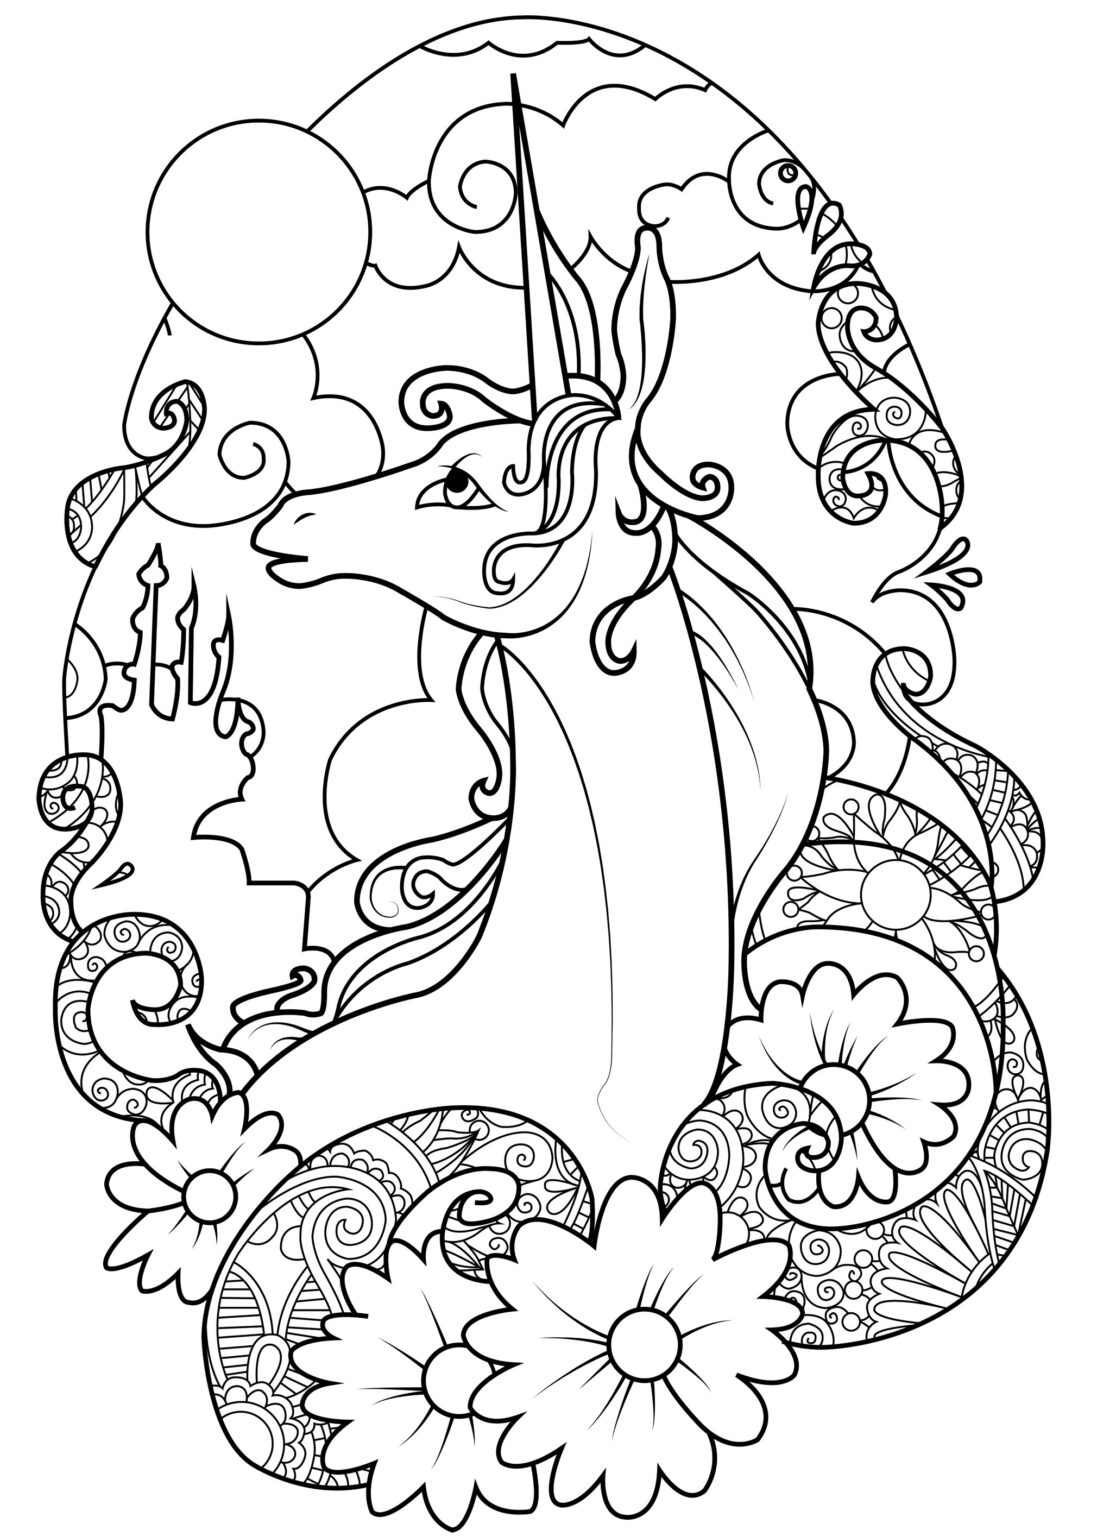 unicorn-coloring-pages-with-flowers-coloring-pages